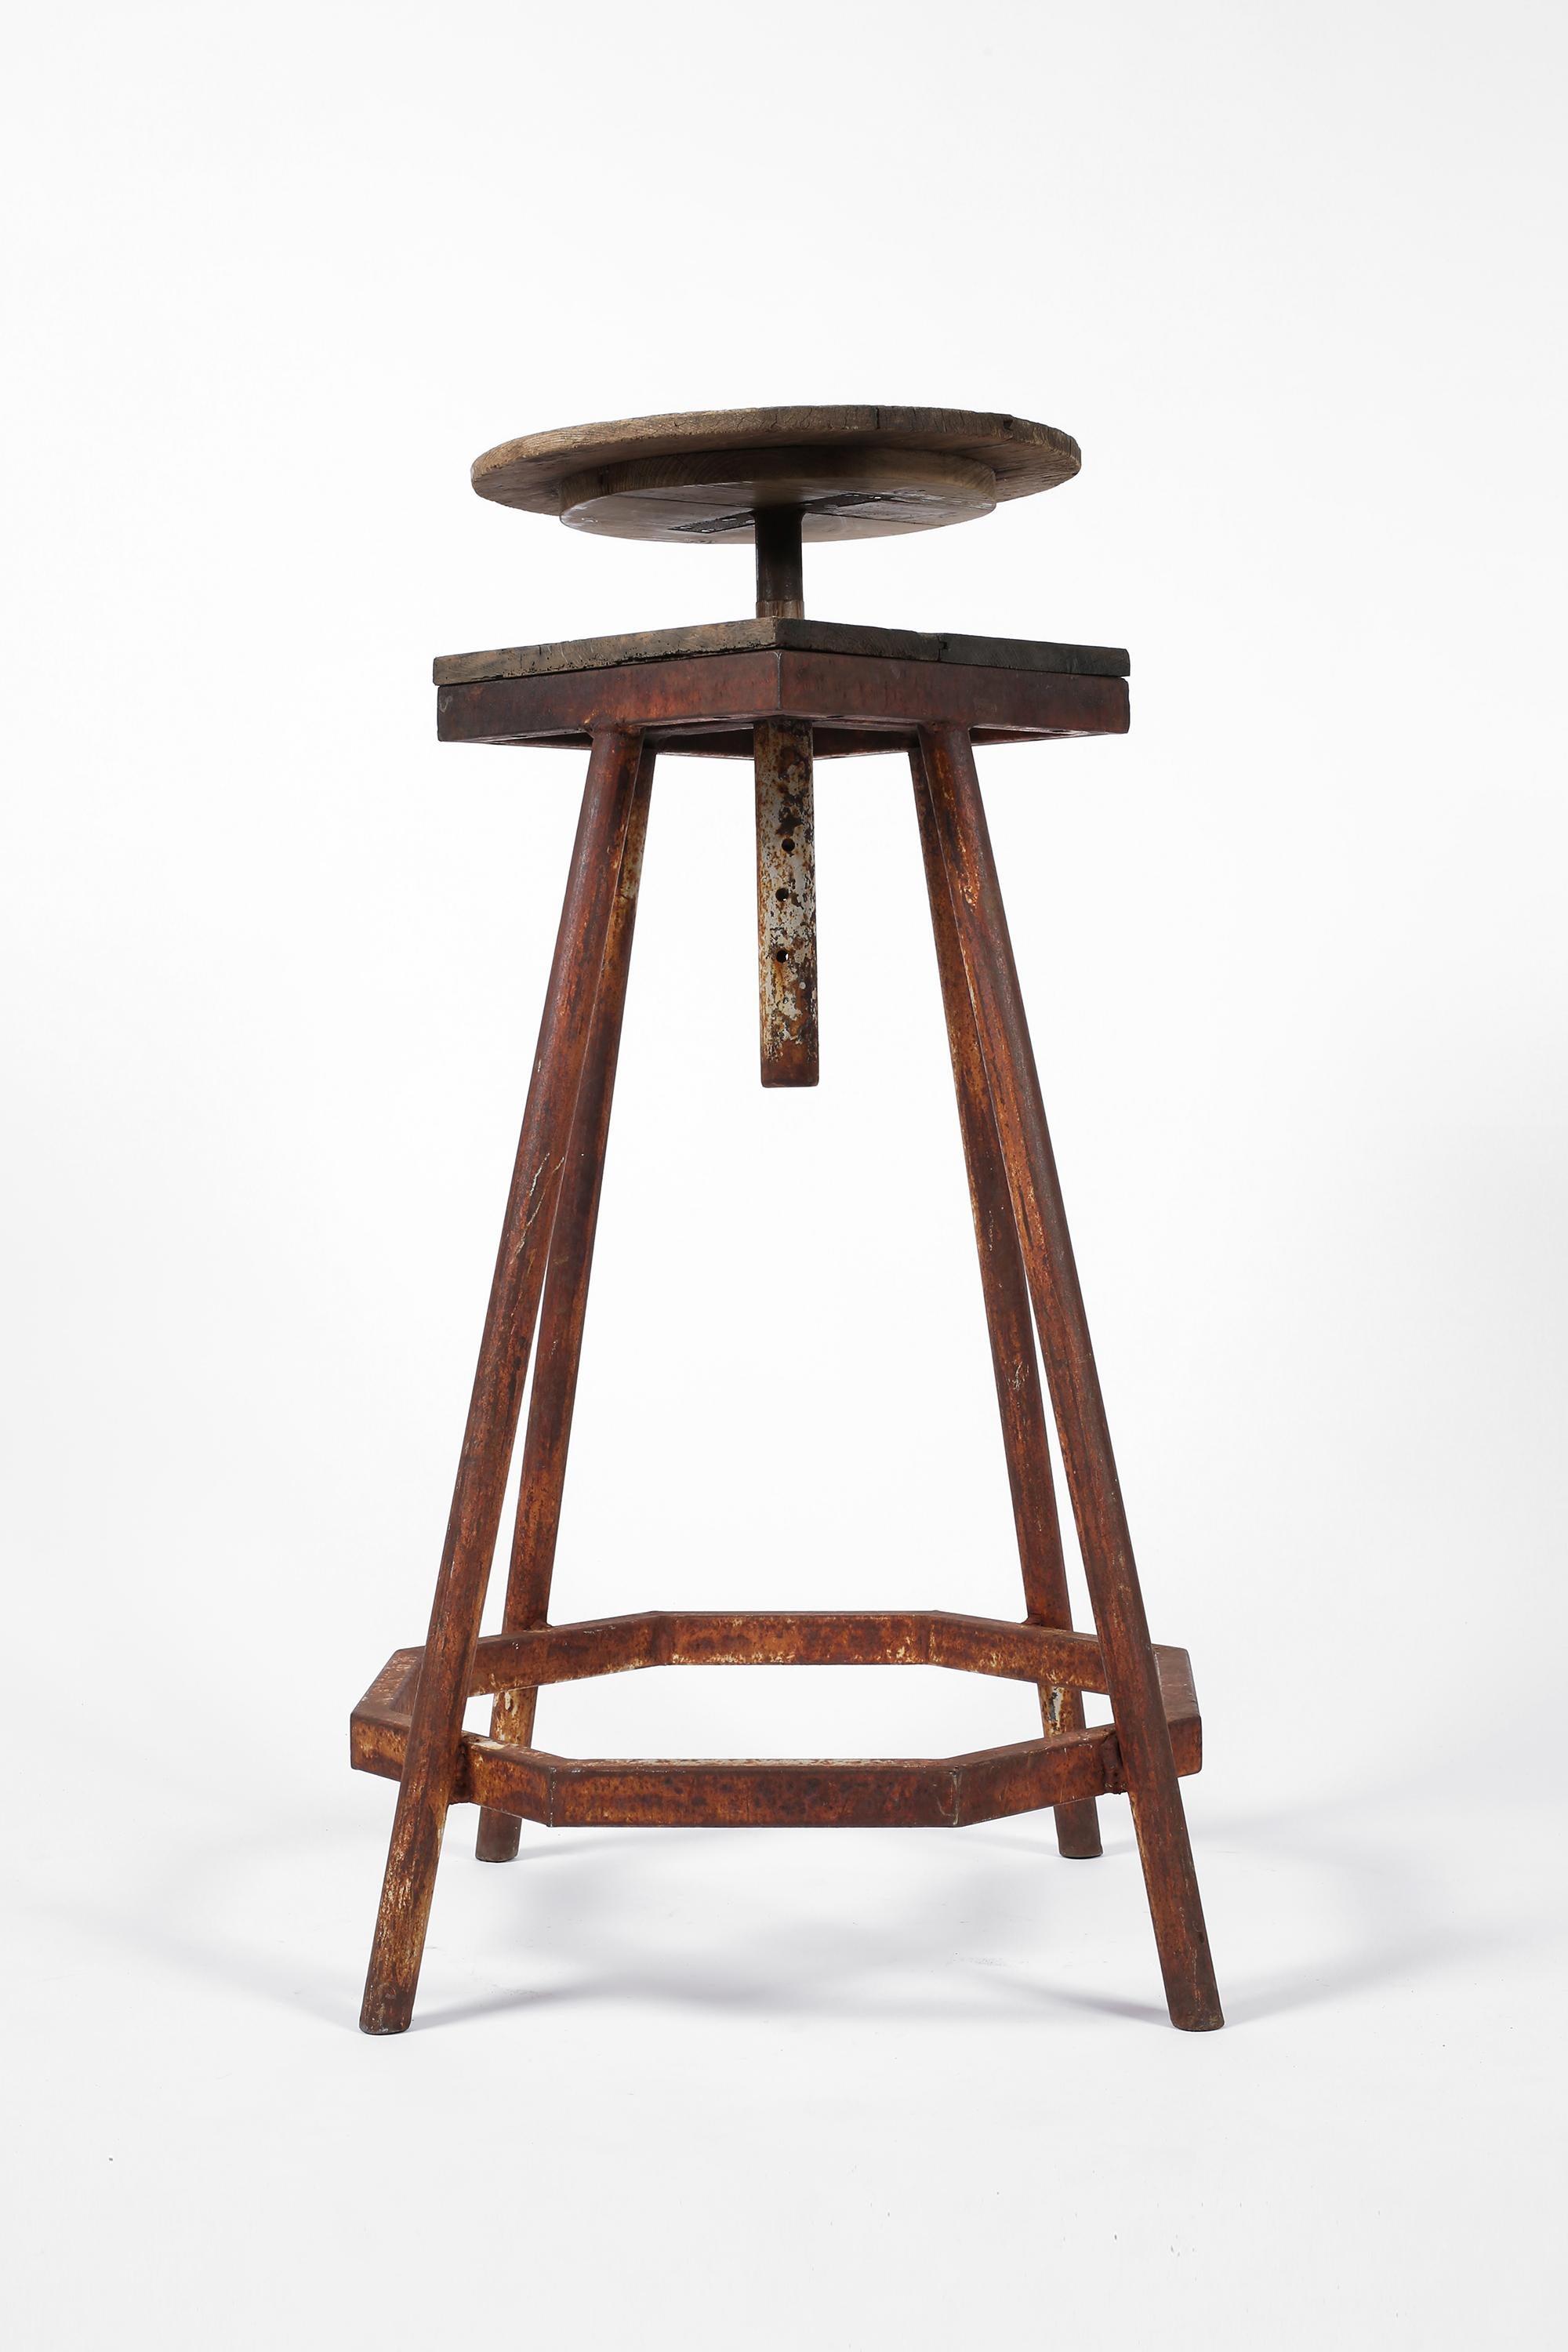 A large early 20th century artists sculpture modelling stand in pine with the most unusual octagonal, modernist base in welded iron. Likely a one-off, the timber is beautifully silvered and the geometric metalwork heavily patinated with remnants of